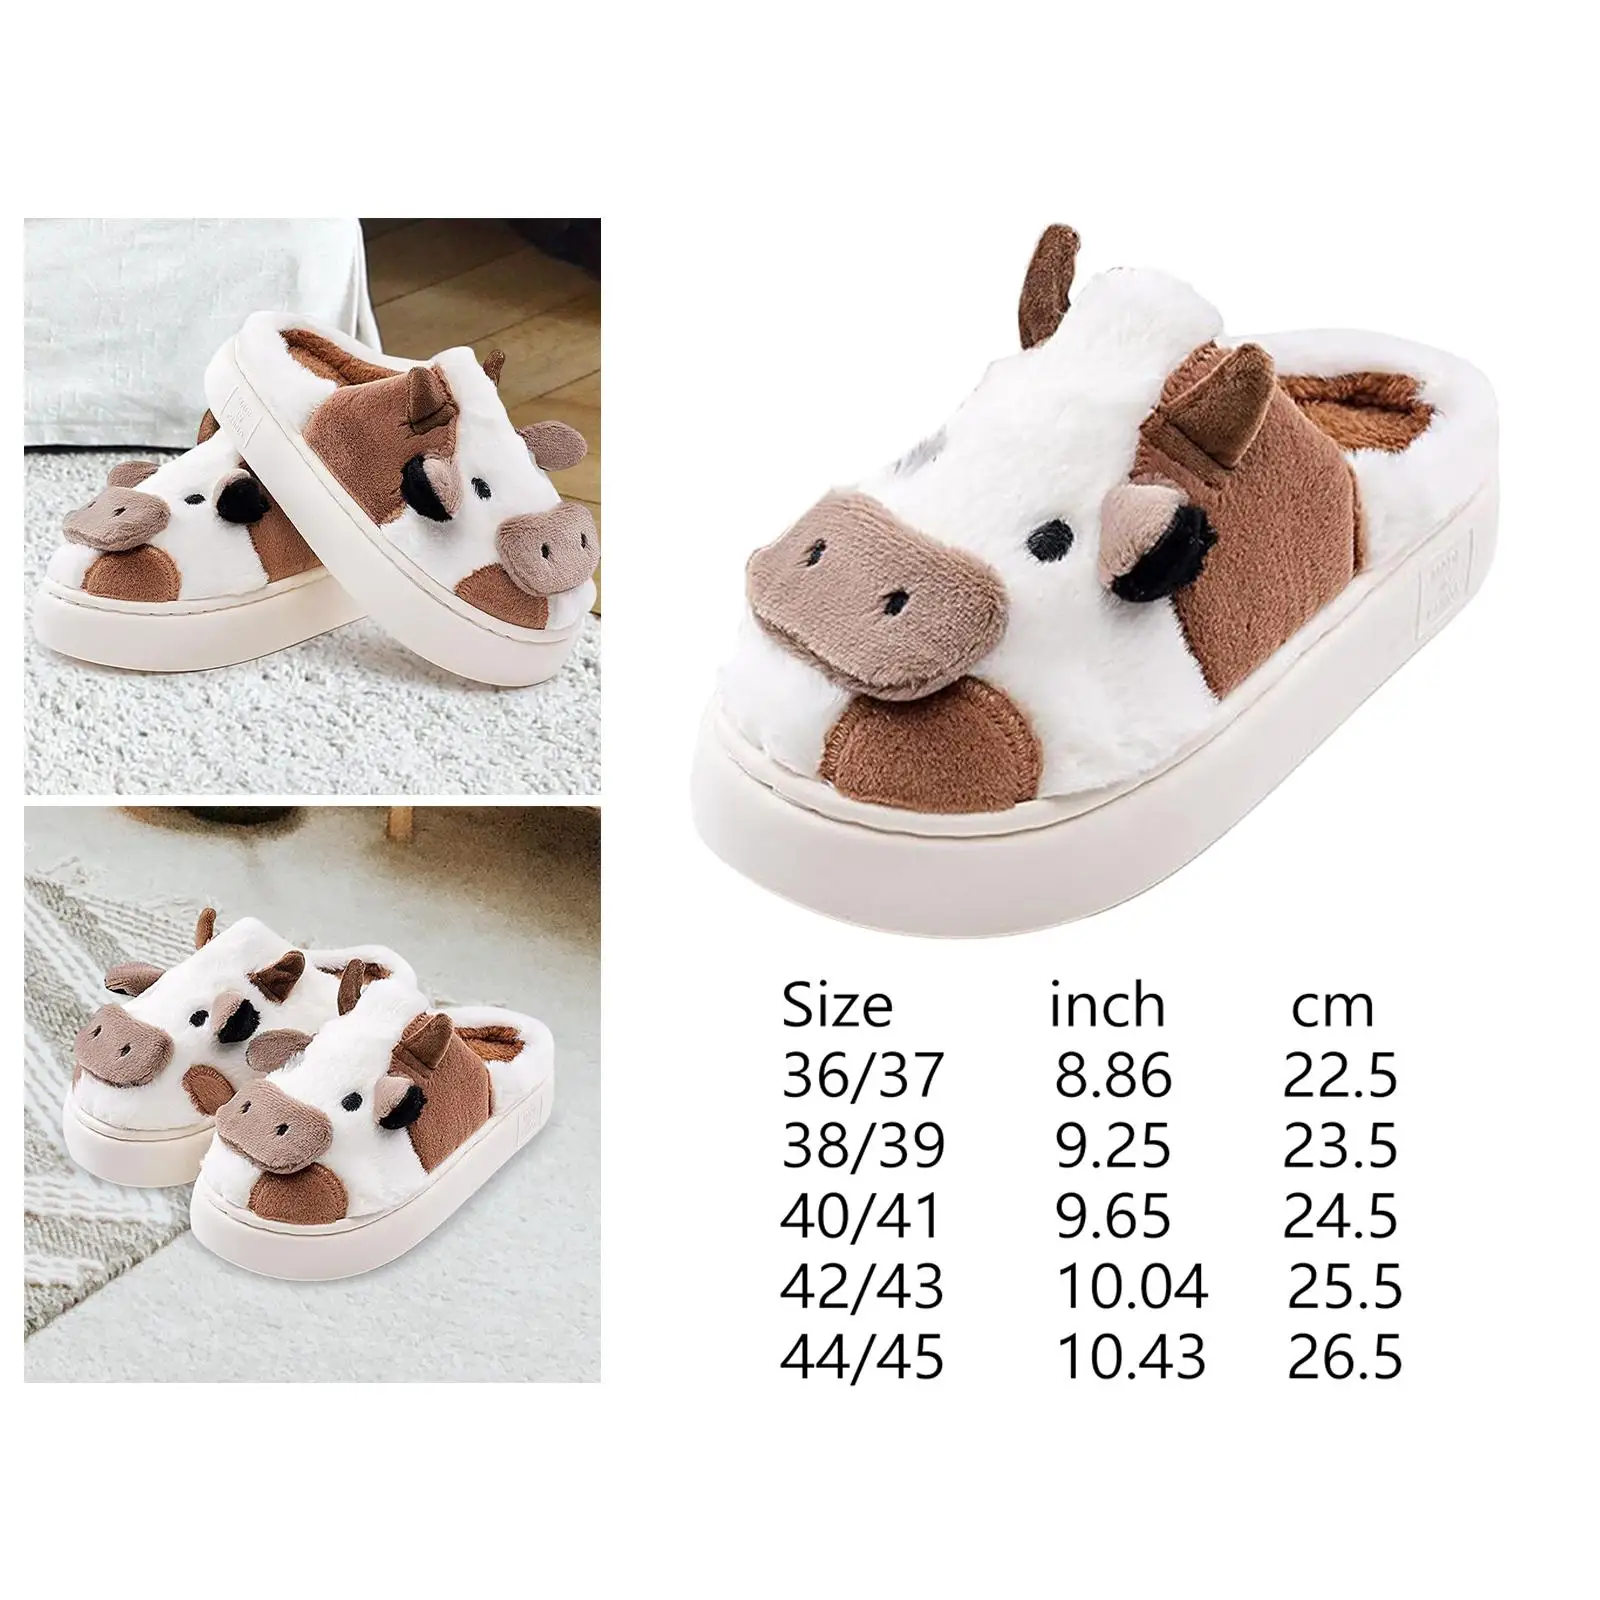 Winter Cow Plush Slippers Novelty Portable Creative Adorable Animal Indoor Shoes Winter Footwear for House Home Dorm Travel Men